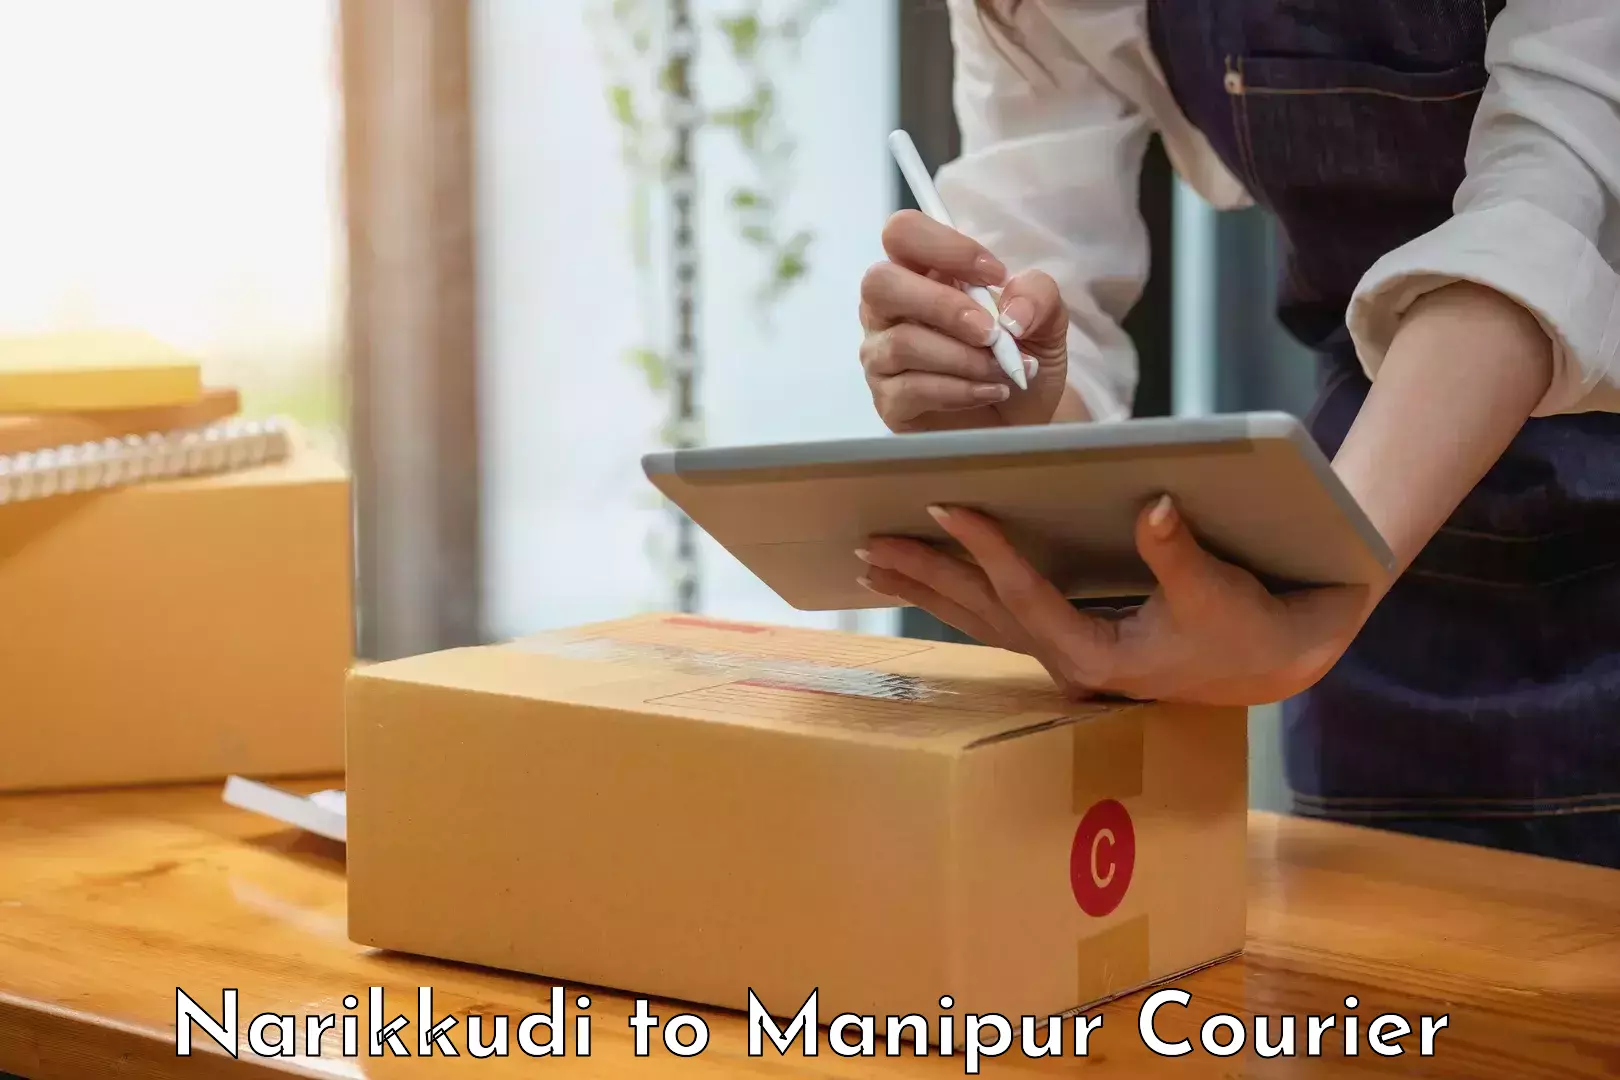 Business delivery service Narikkudi to Manipur